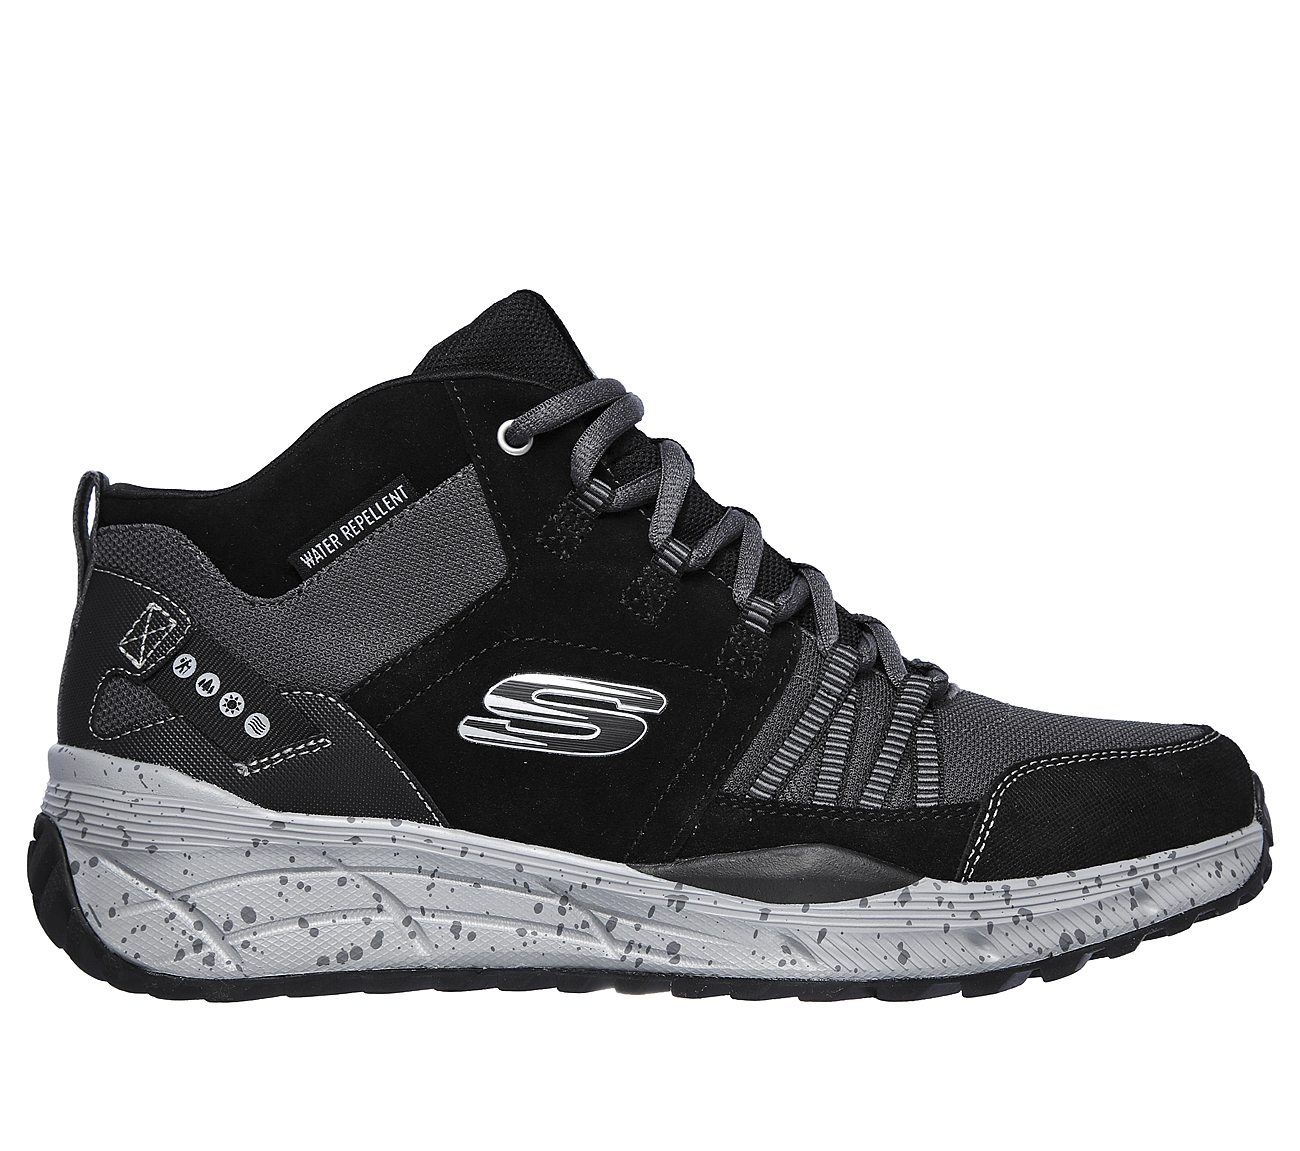 EQUALIZER 4.0 TRAIL -, BLACK/CHARCOAL Footwear Lateral View